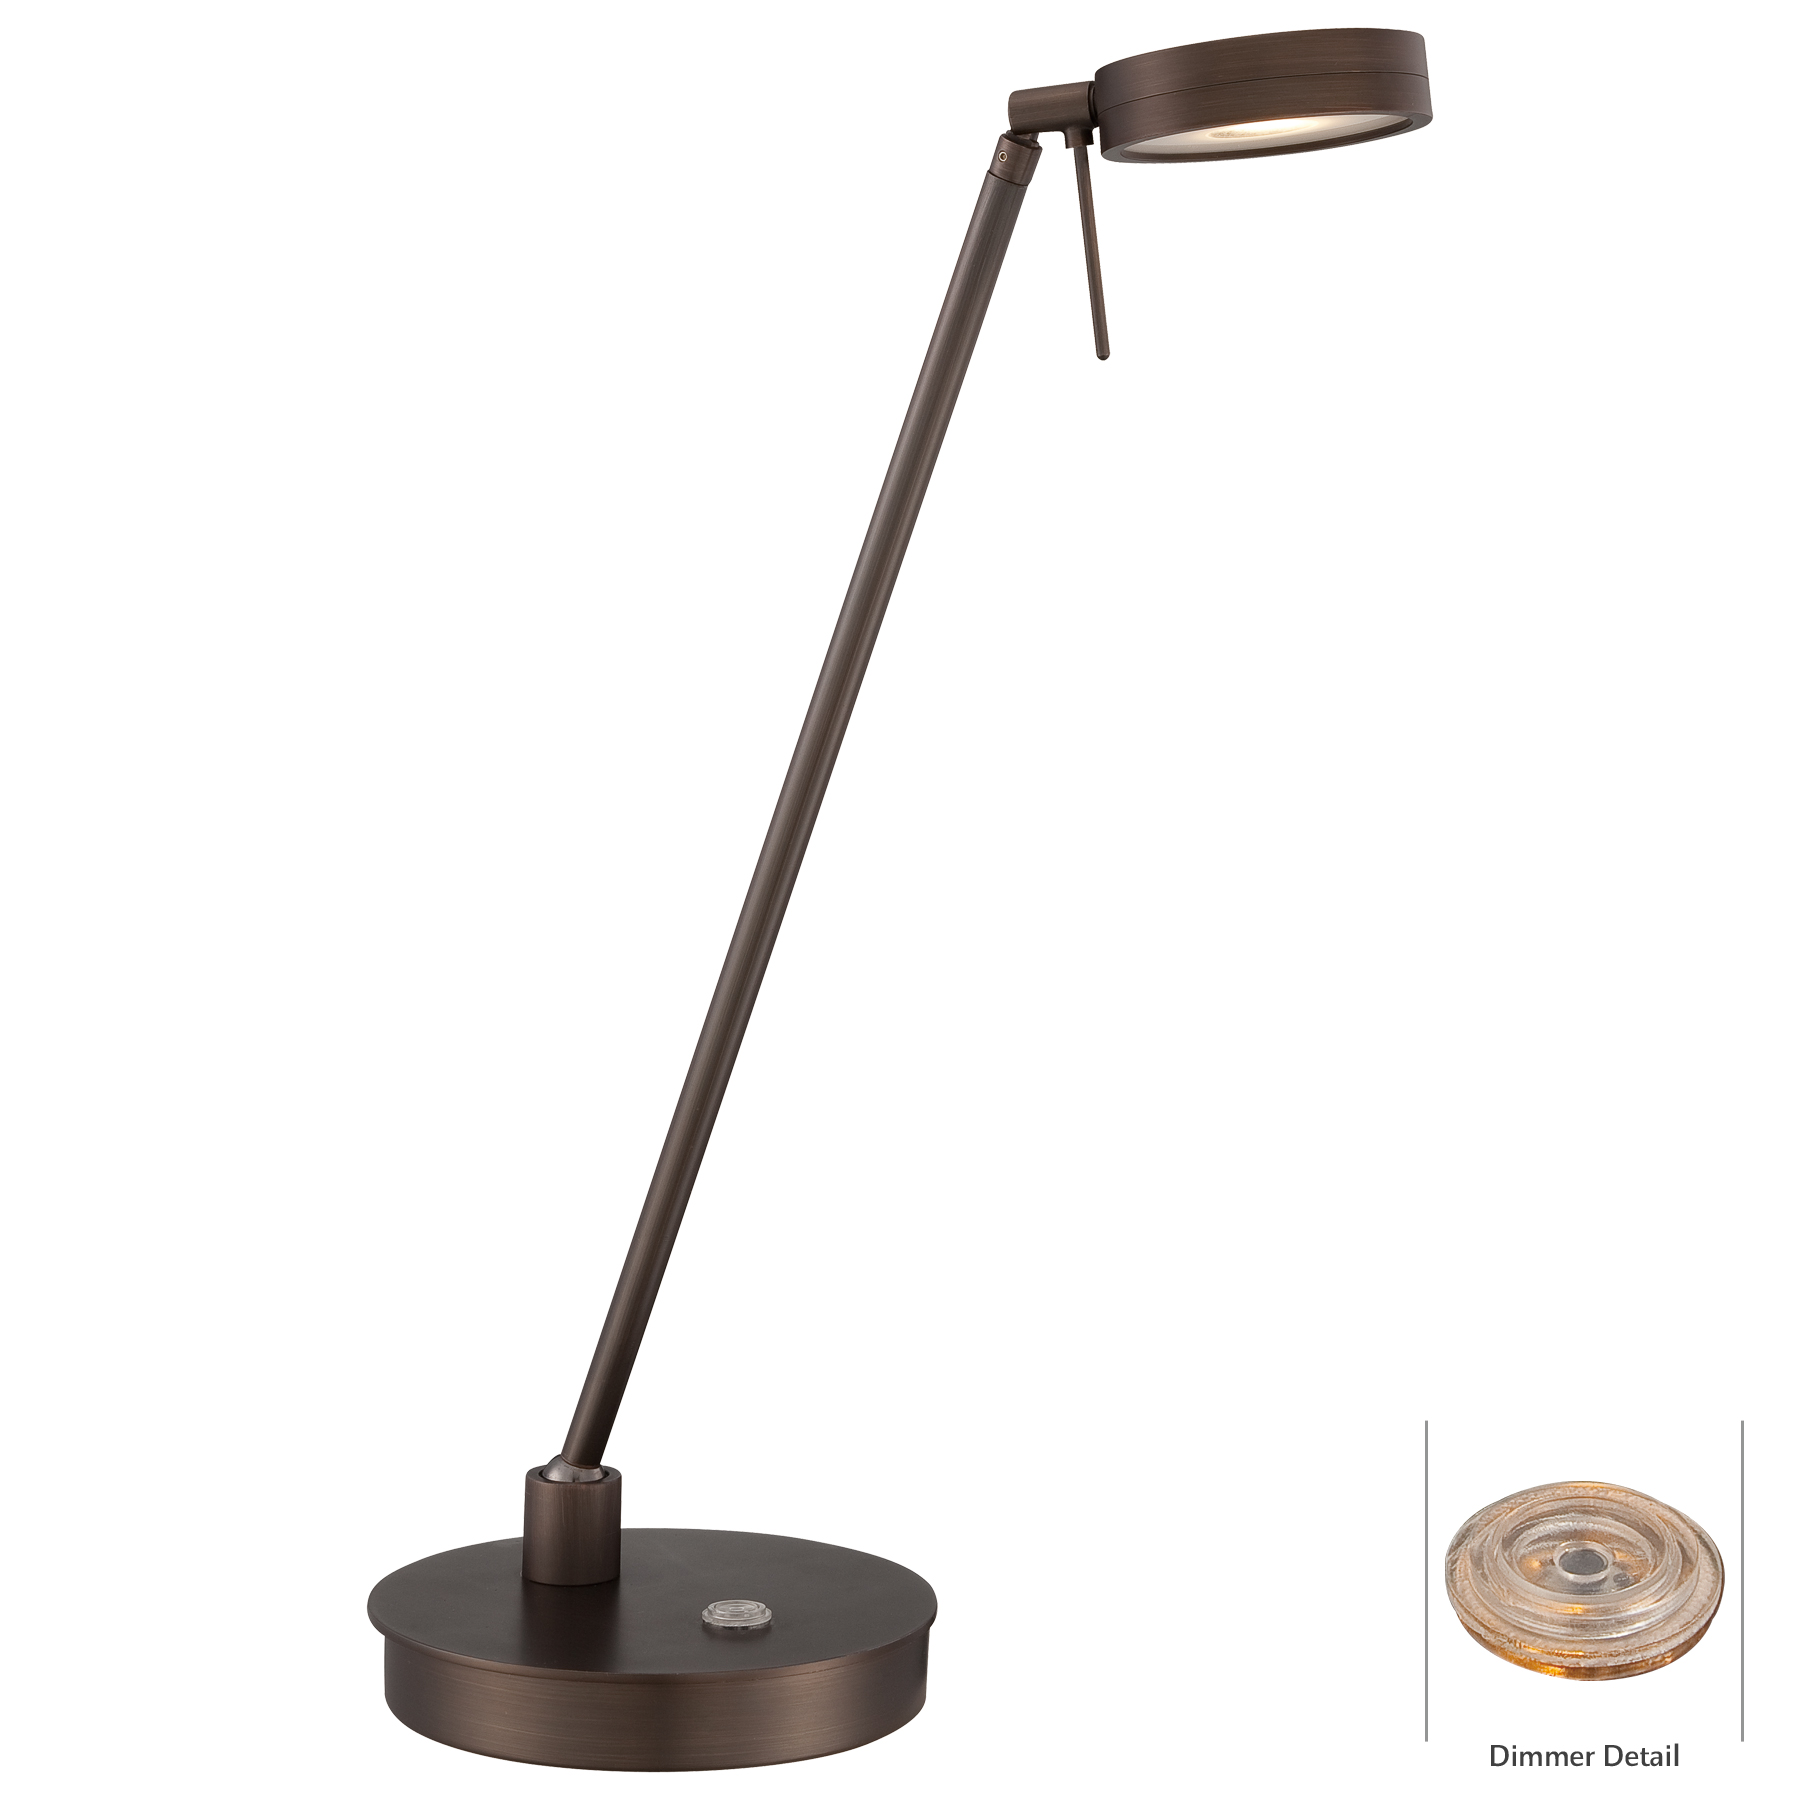 Georges Reading Room LED Flat Head Desk Lamp by George Kovacs P4306-647  GKV64359